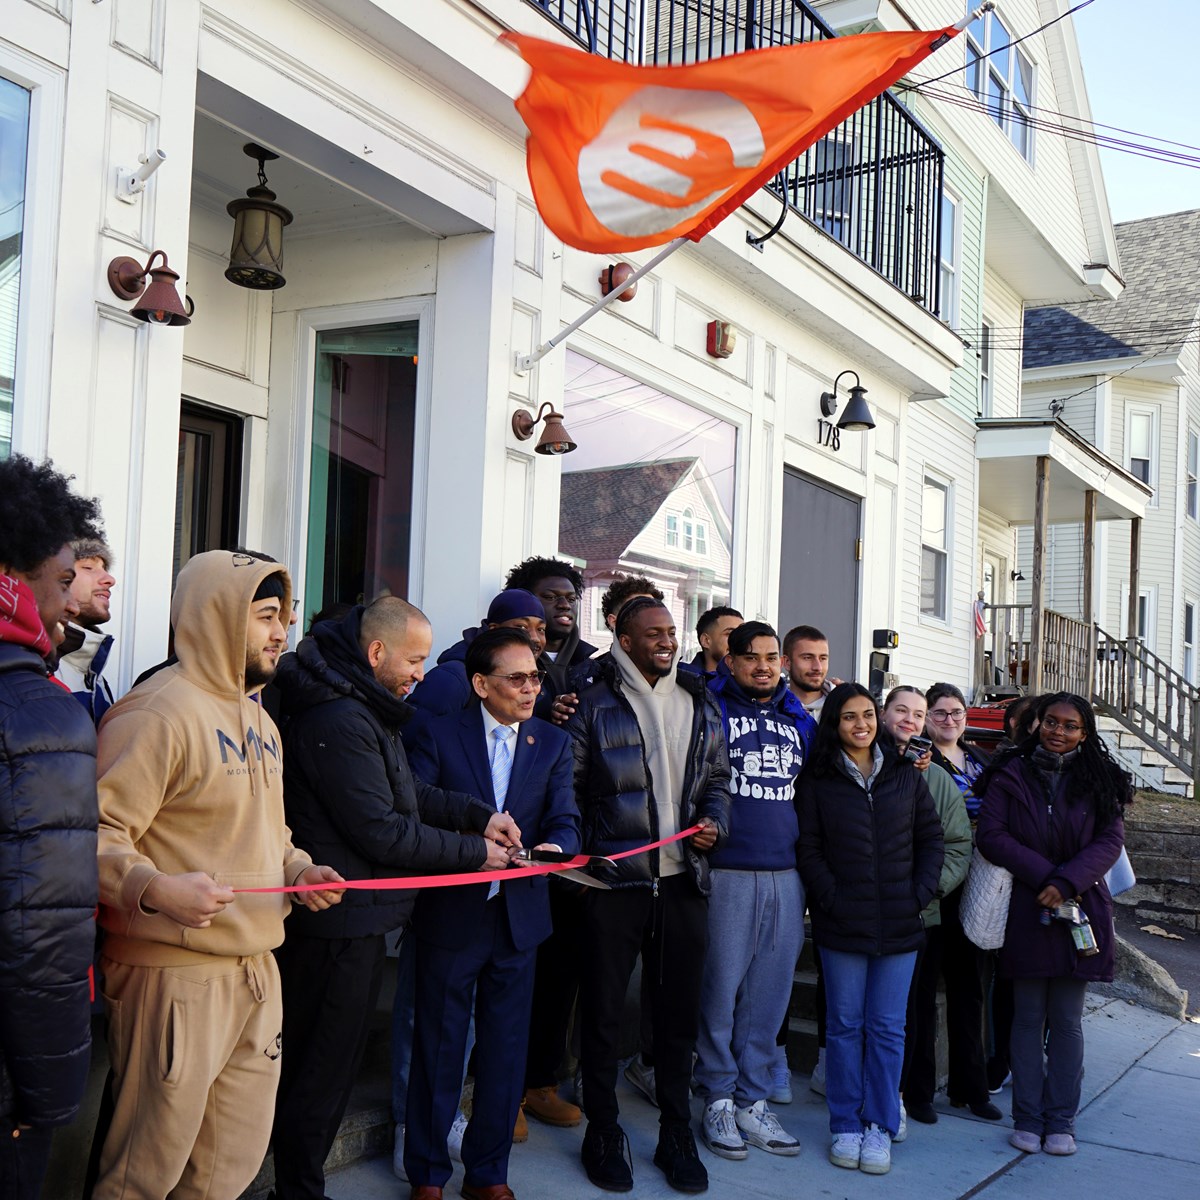 A group of people participate in a ribbon cutting ceremony outside a restaurant.